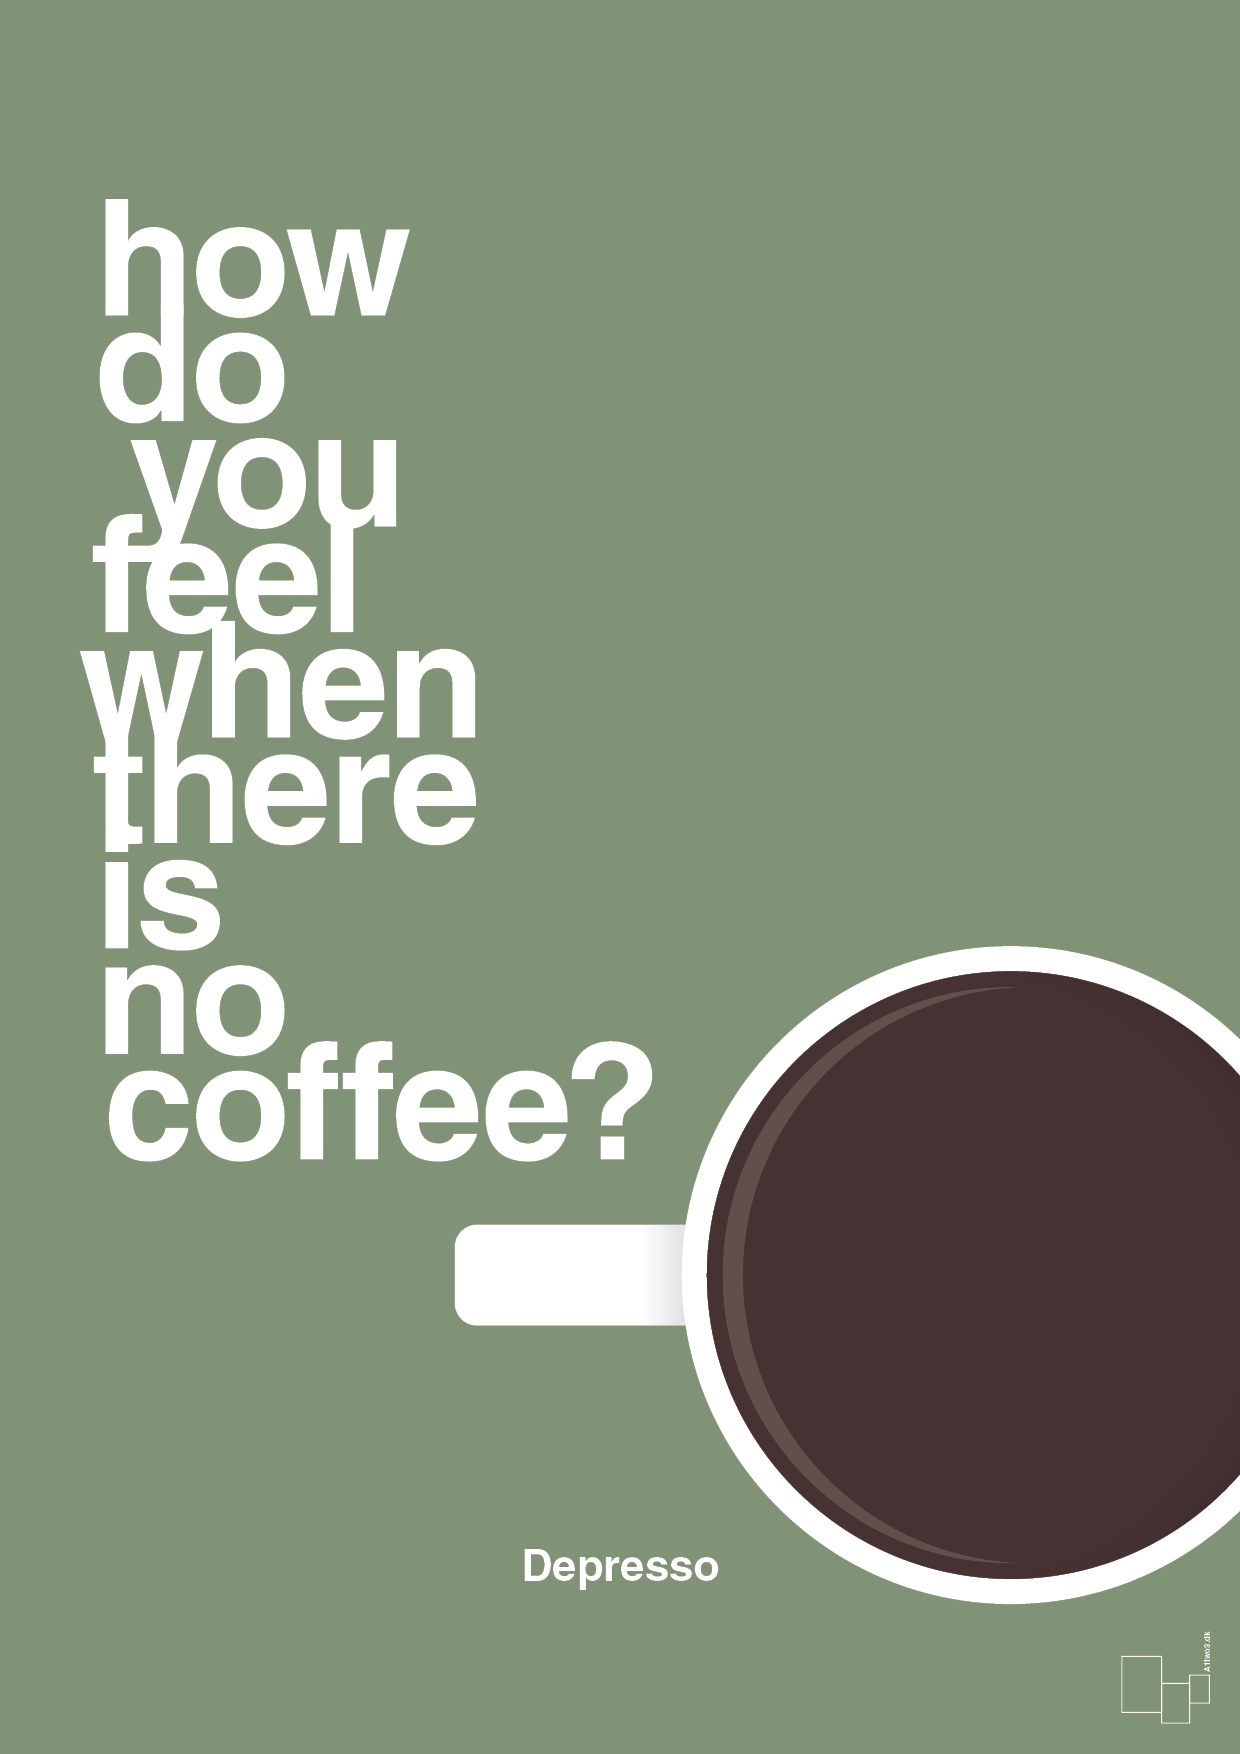 how do you feel when there is no coffee? depresso - Plakat med Mad & Drikke i Jade